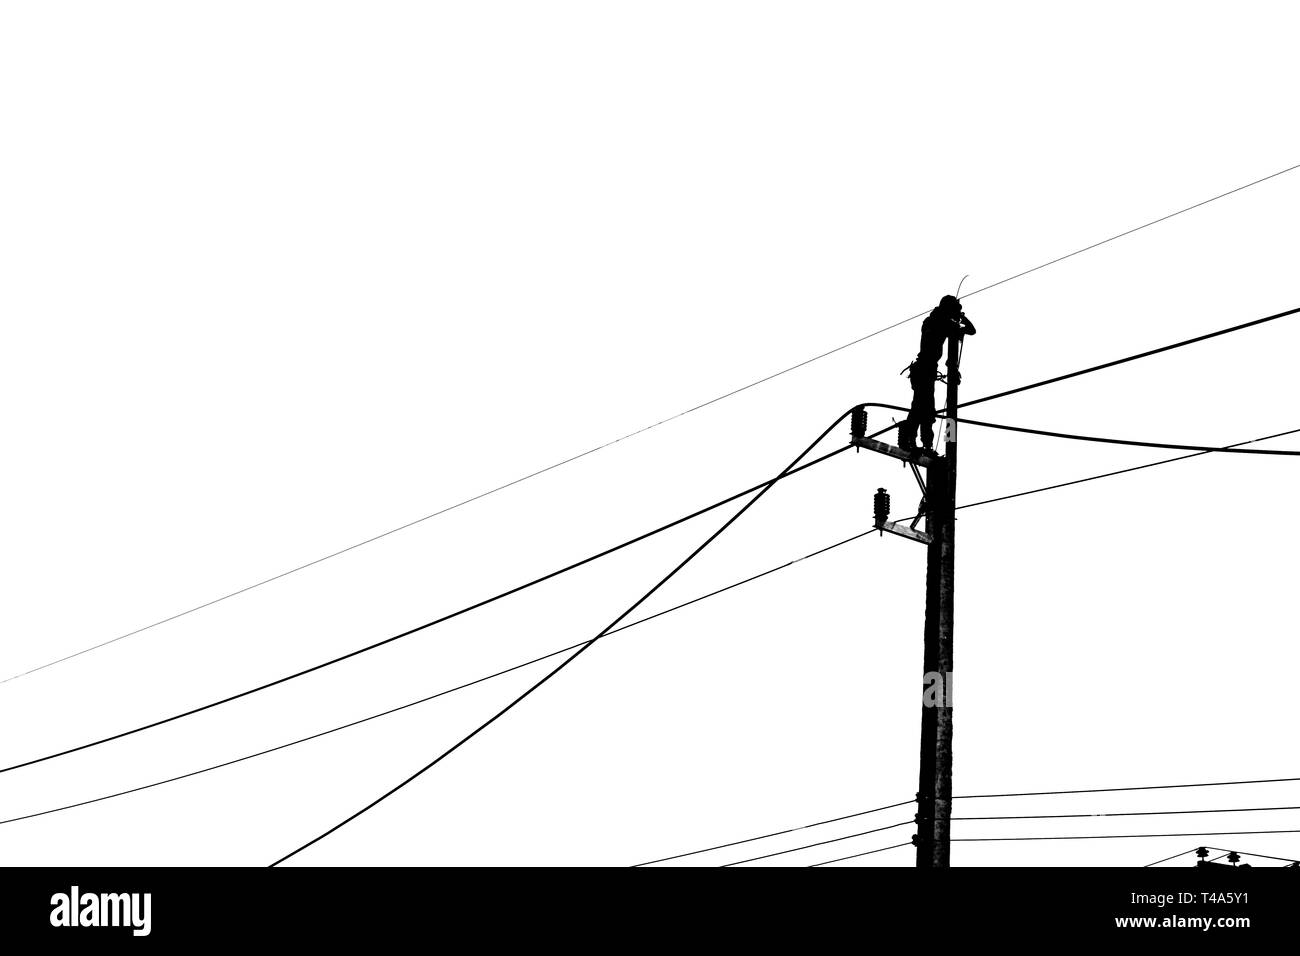 The electrical worker is changing the high voltage power cable. High voltage pole picture style black and white. Stock Photo